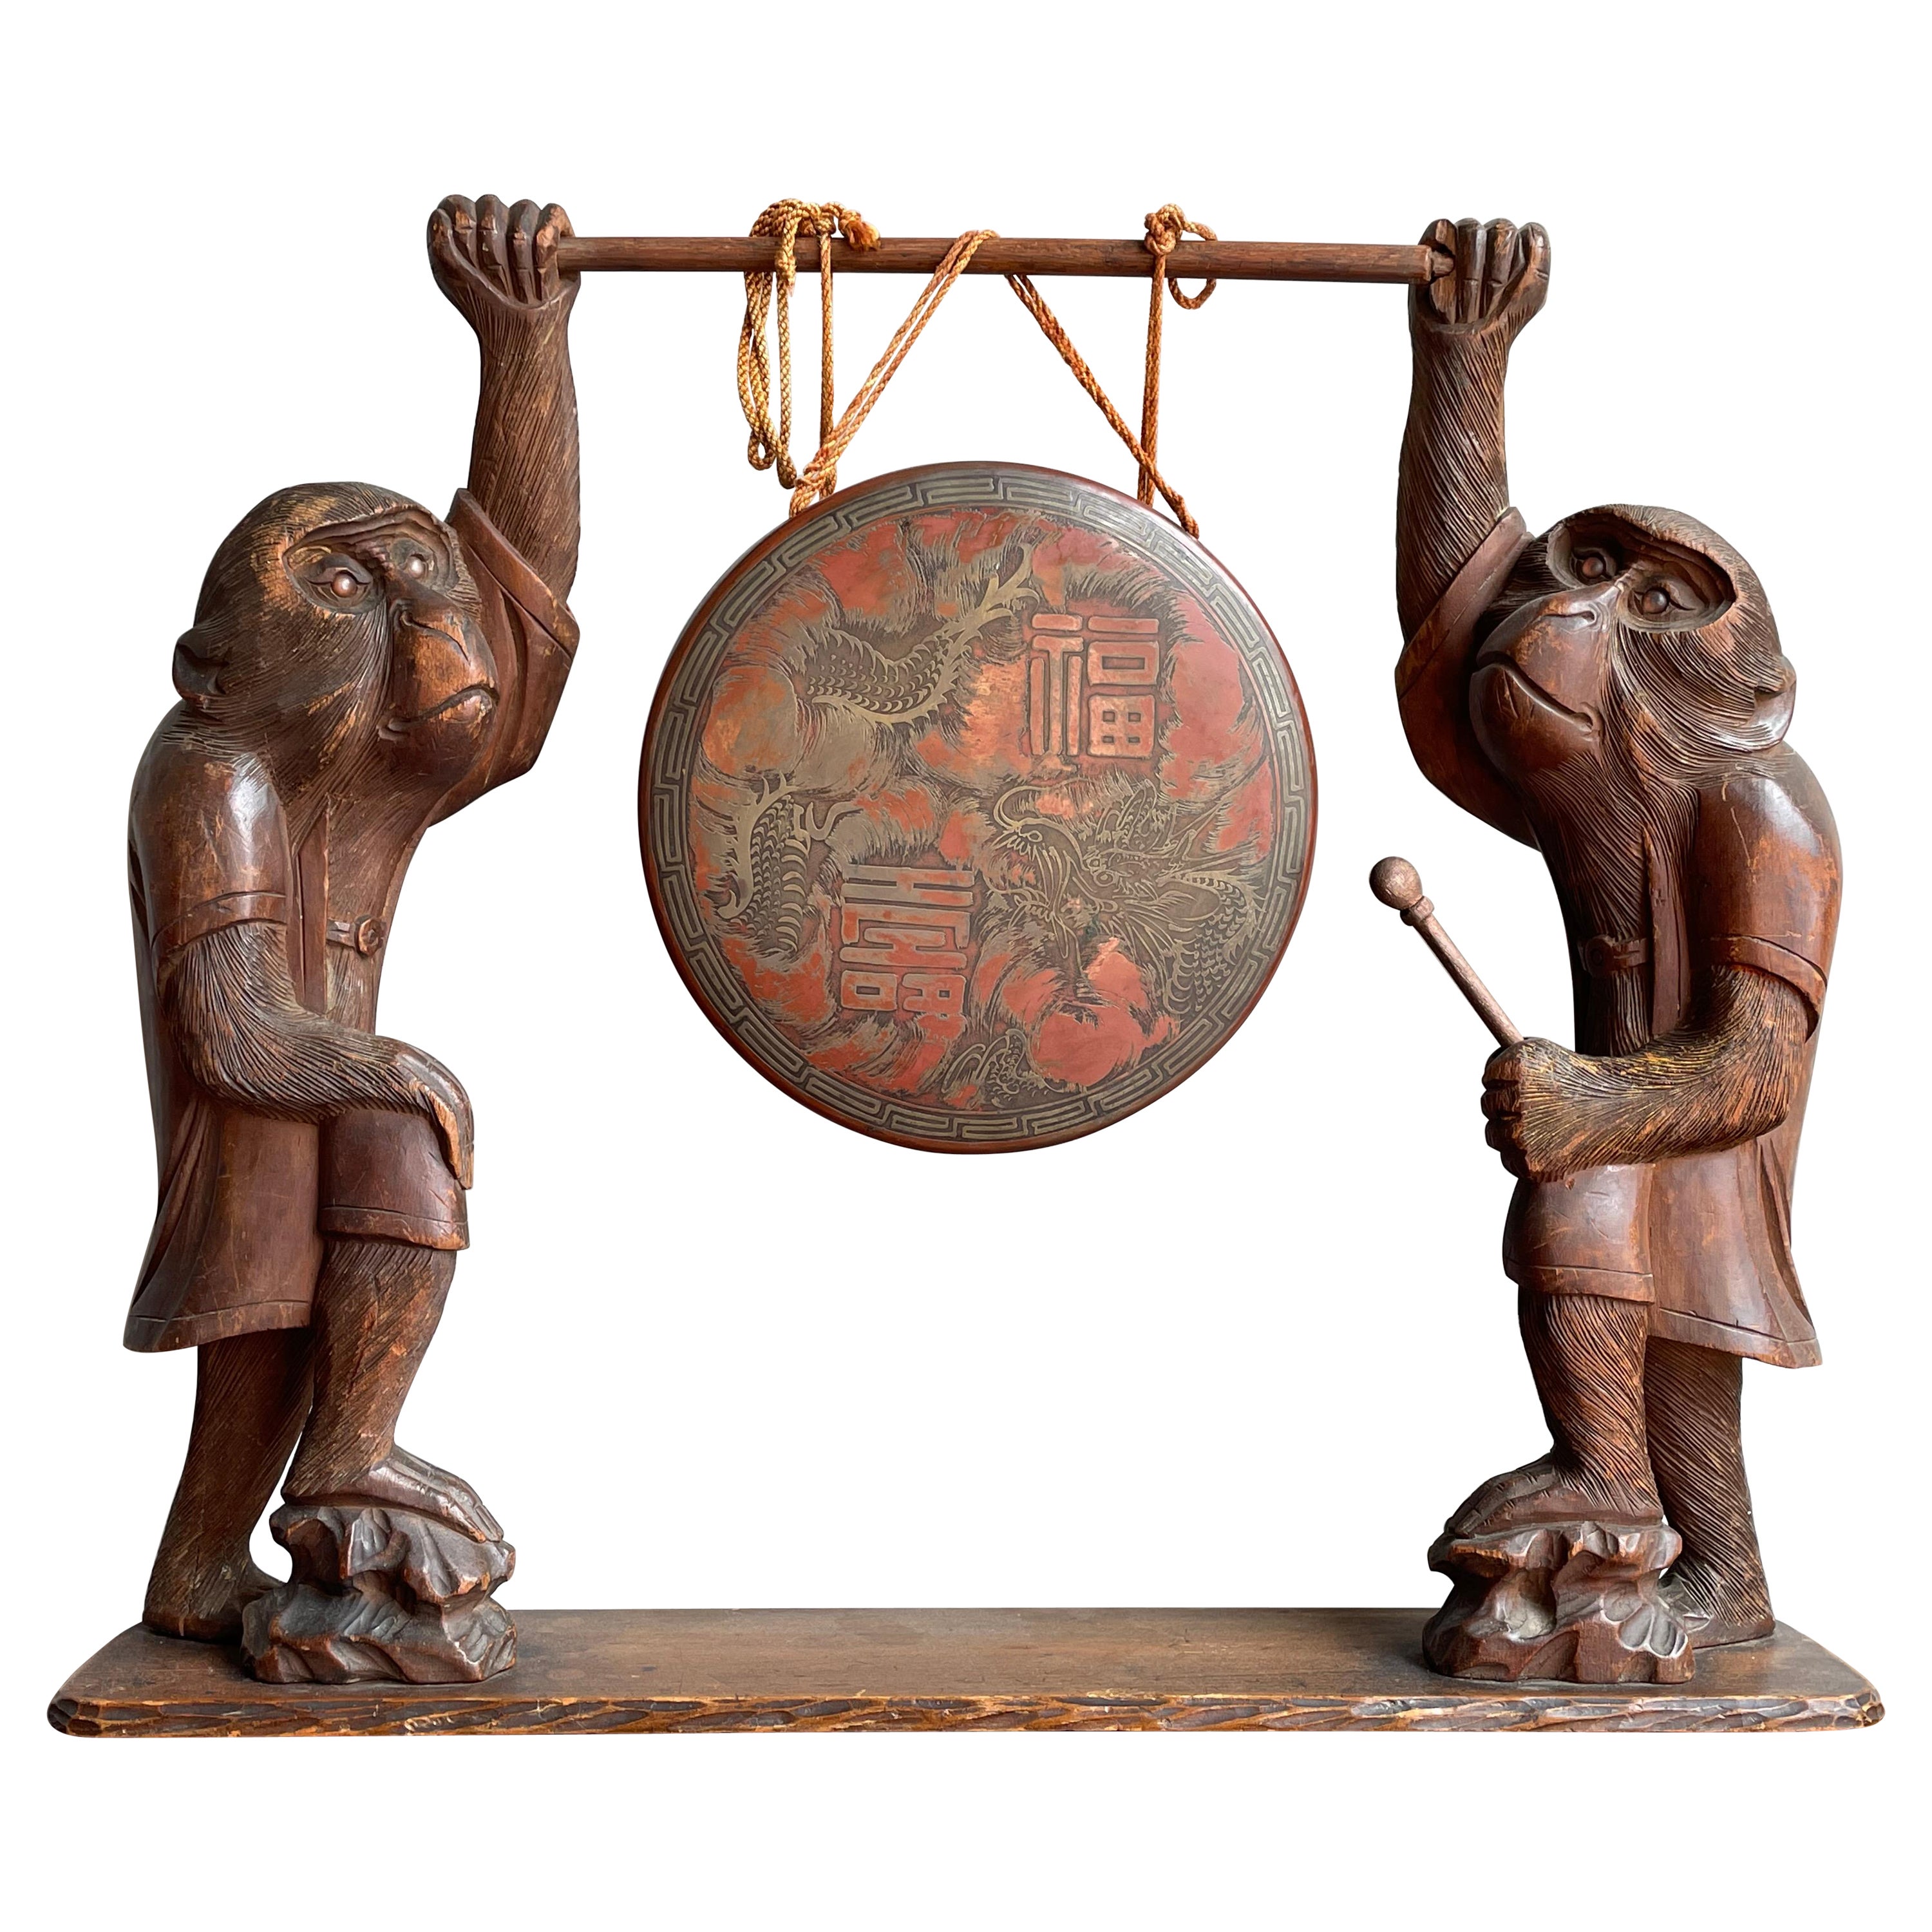 Antique Chinese Table Gong Held Up by Two Hand Carved Wooden Monkey Sculptures